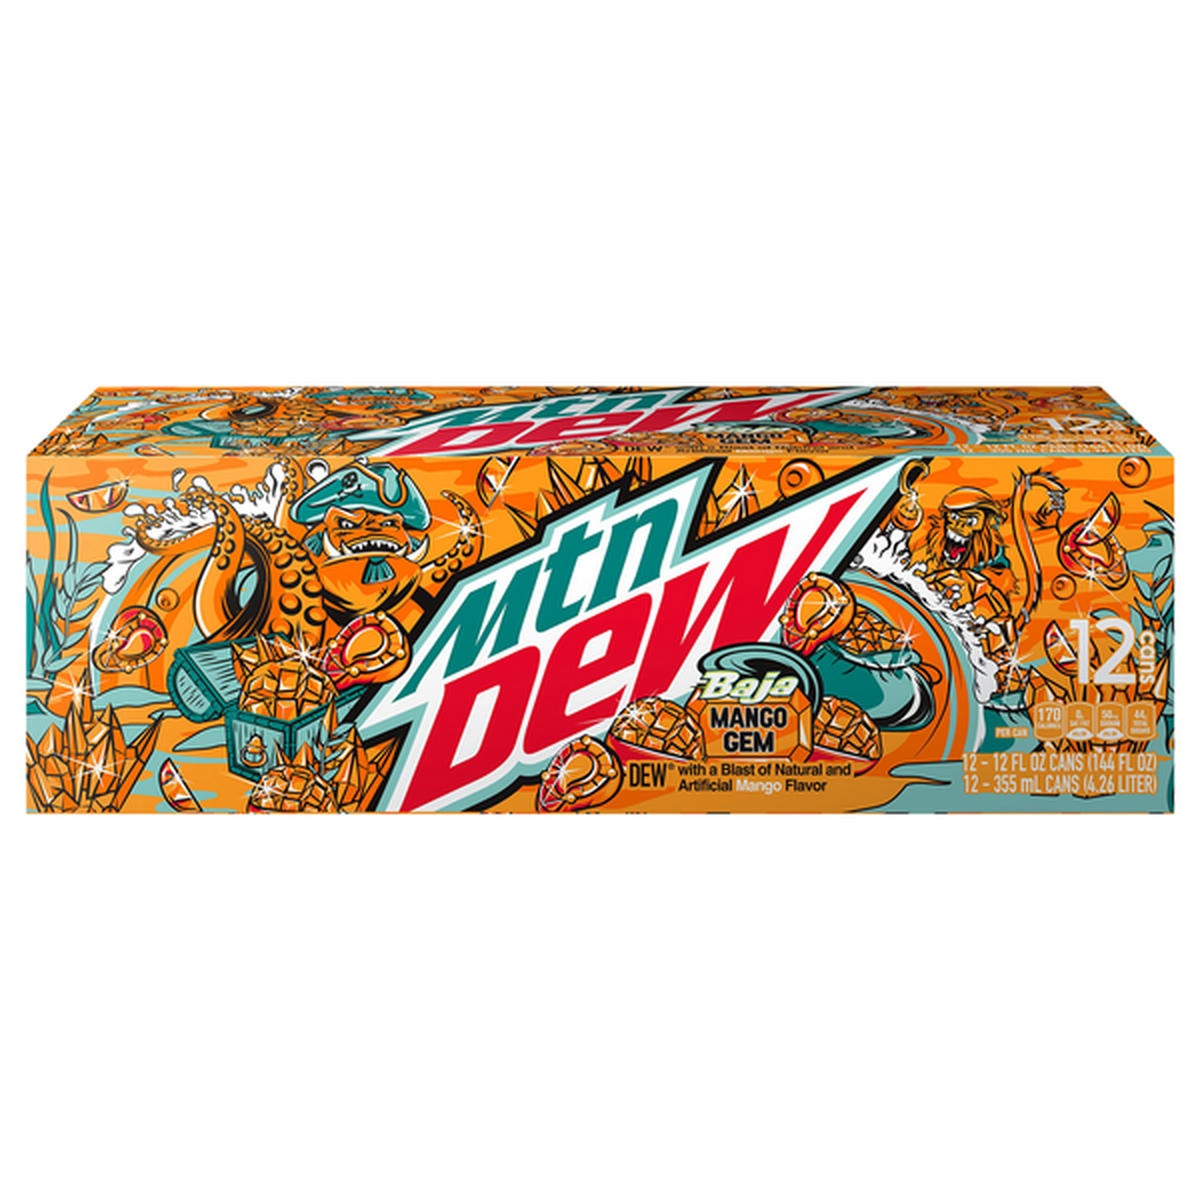 BUILD YOUR OWN MTN DEW 12 FLOZ SODA CAN PACK PICK & CHOOSE 14 DIFFERENT  FLAVORS